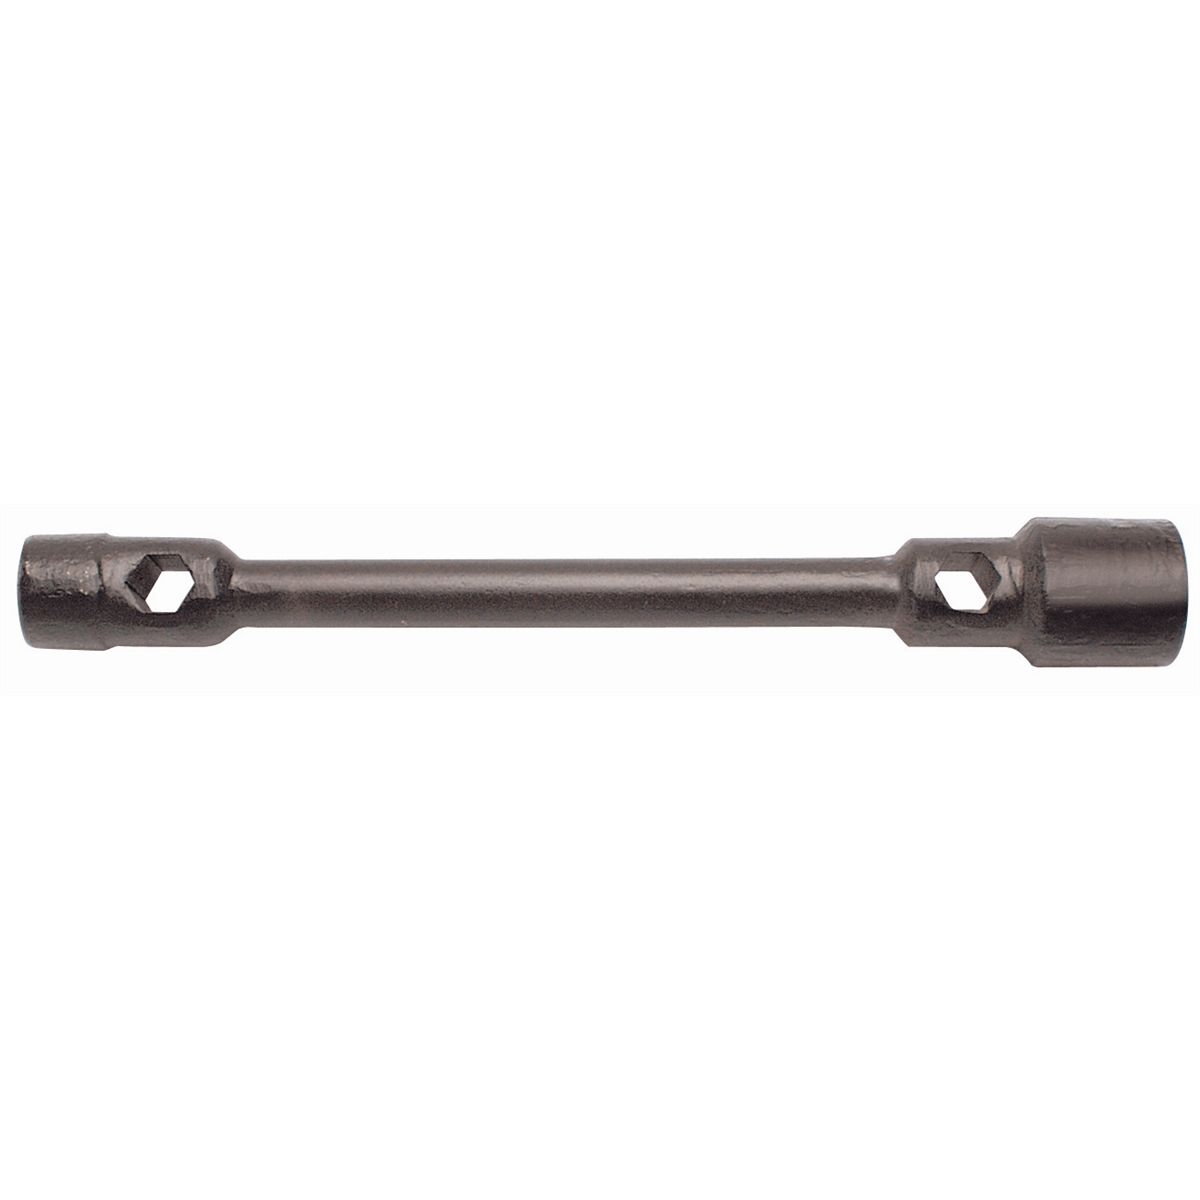 Double-End Truck Wrench TR9 - 1-1/4 In Hex x 1-1/16 In Hex